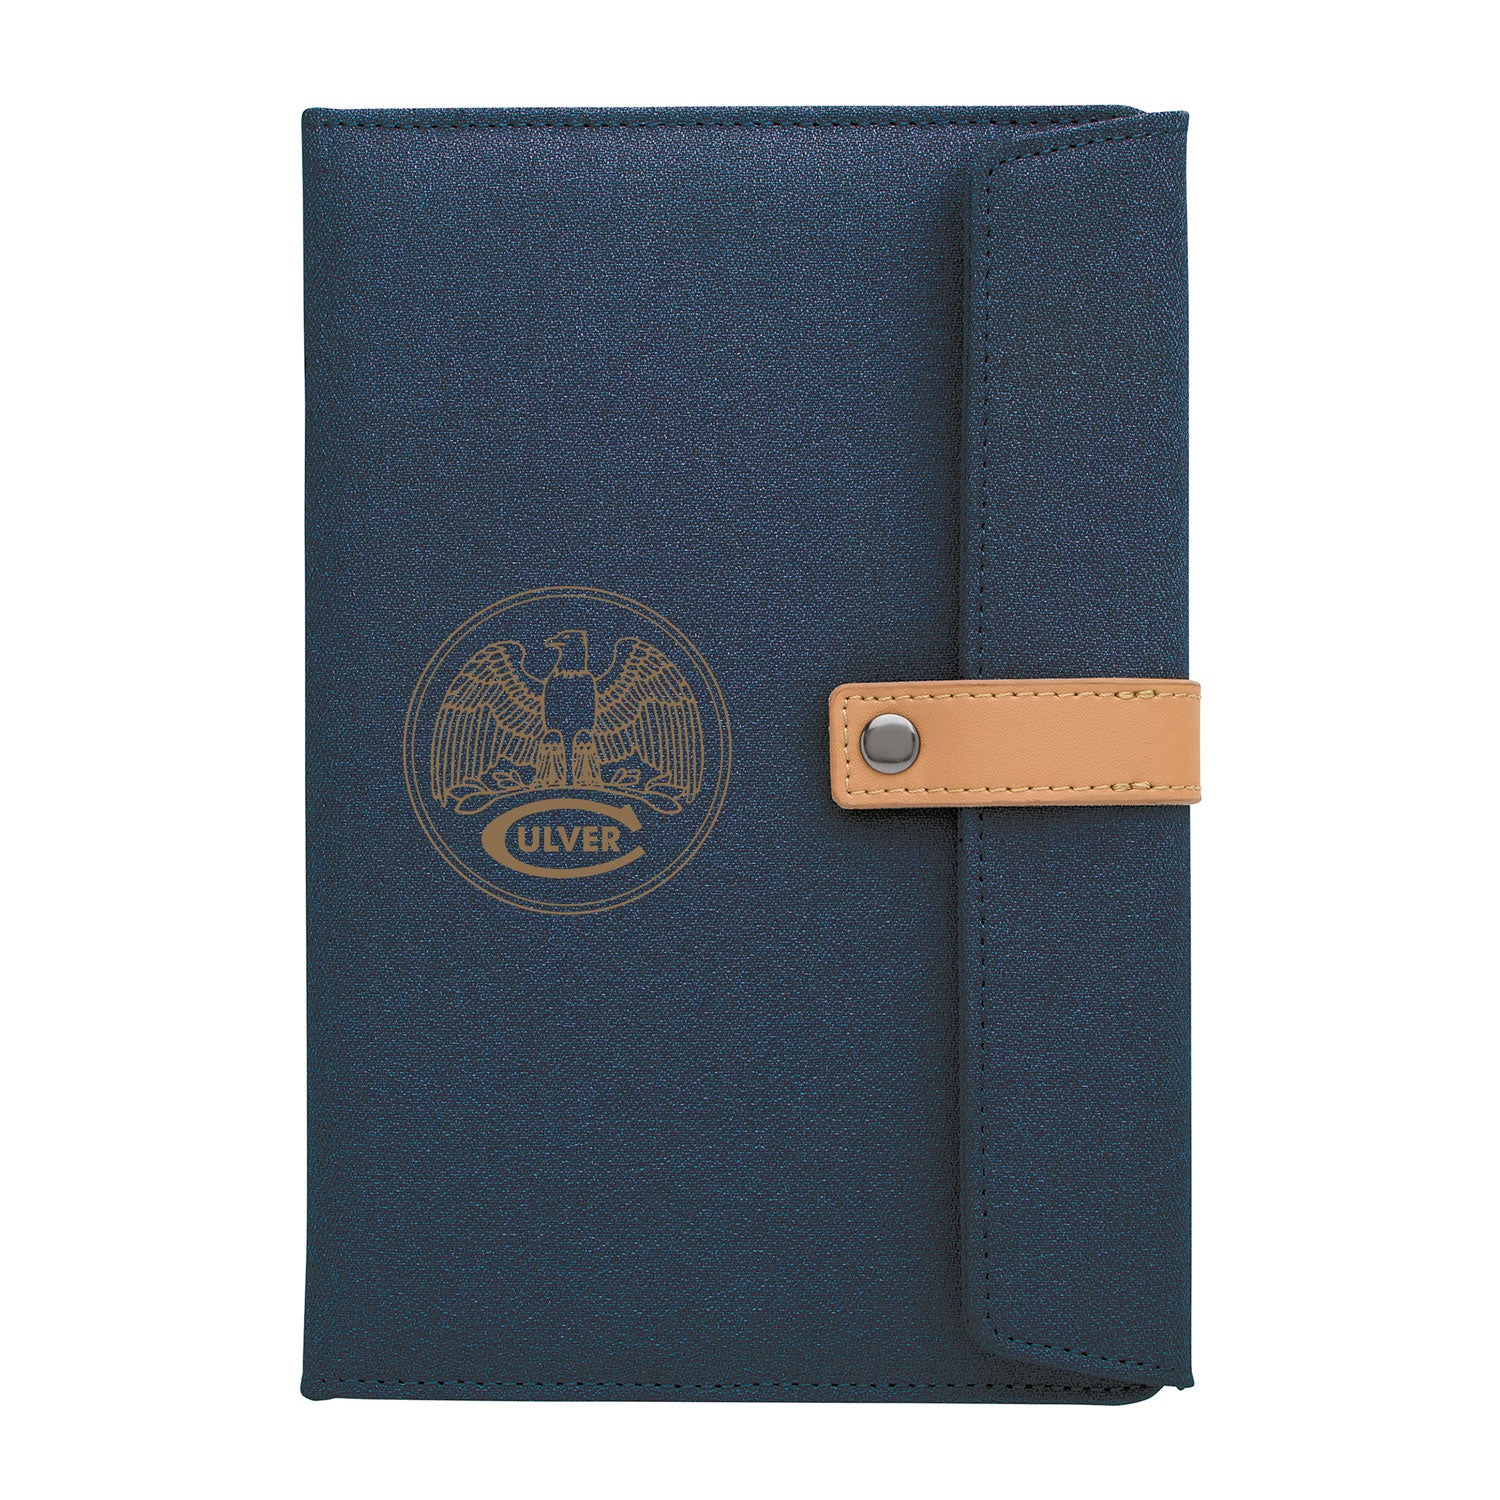 Culver Academies Two-Tone Journal with Leather Closure - Navy